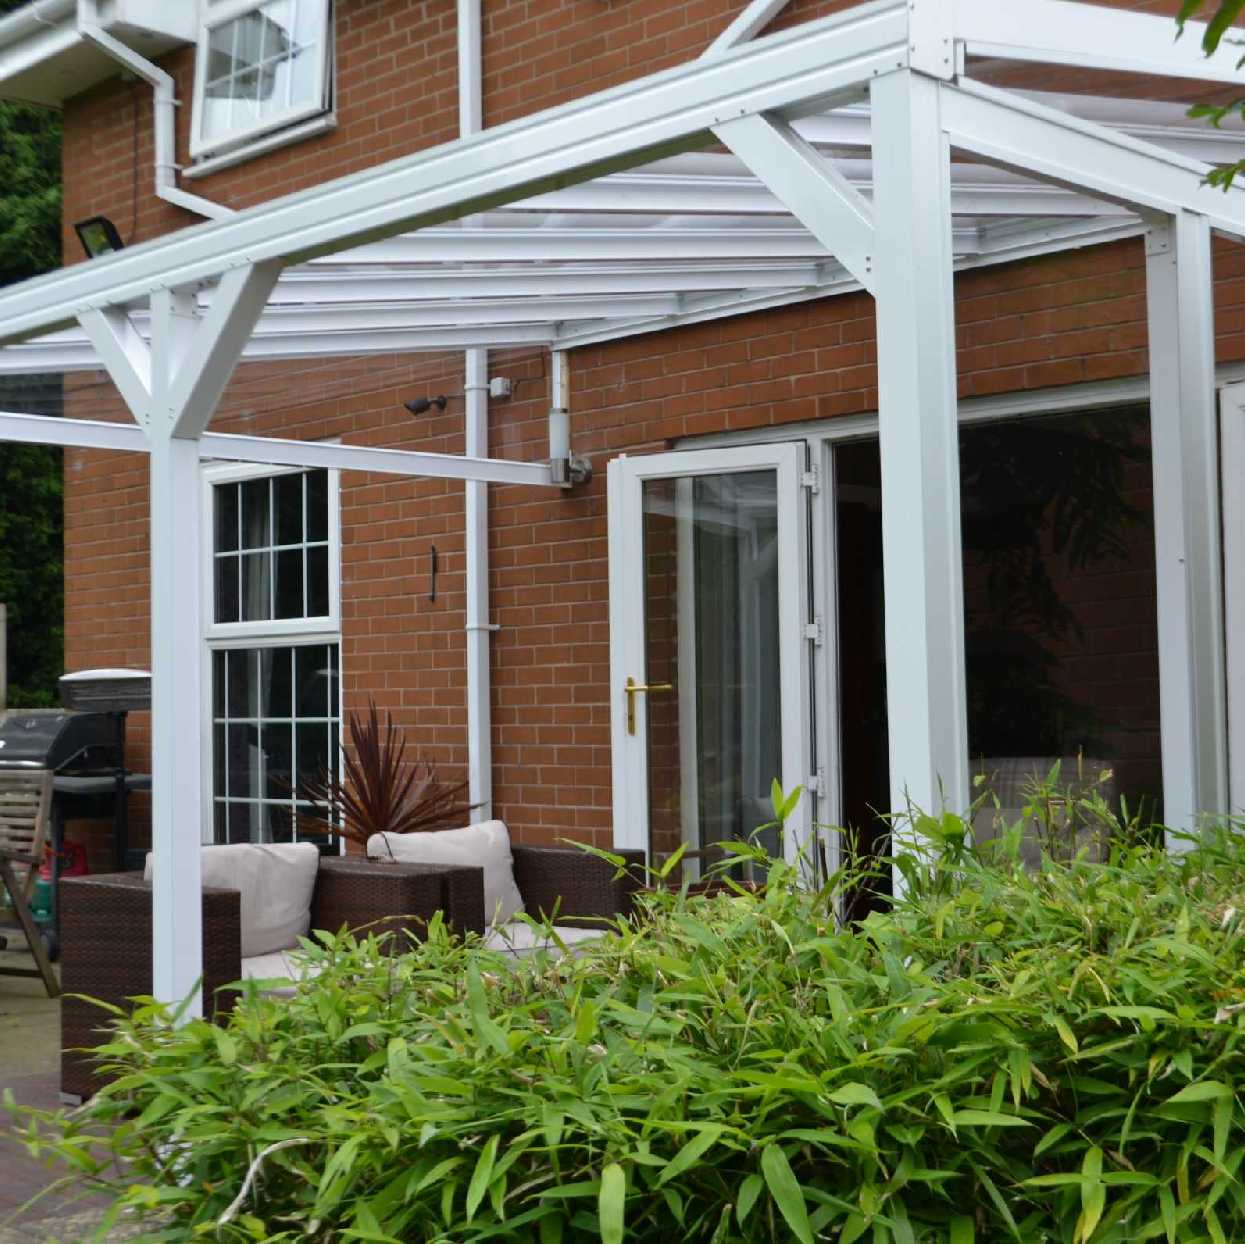 Omega Smart Lean-To Canopy, White UNGLAZED for 6mm Glazing - 9.8m (W) x 2.5m (P), (5) Supporting Posts from Omega Build